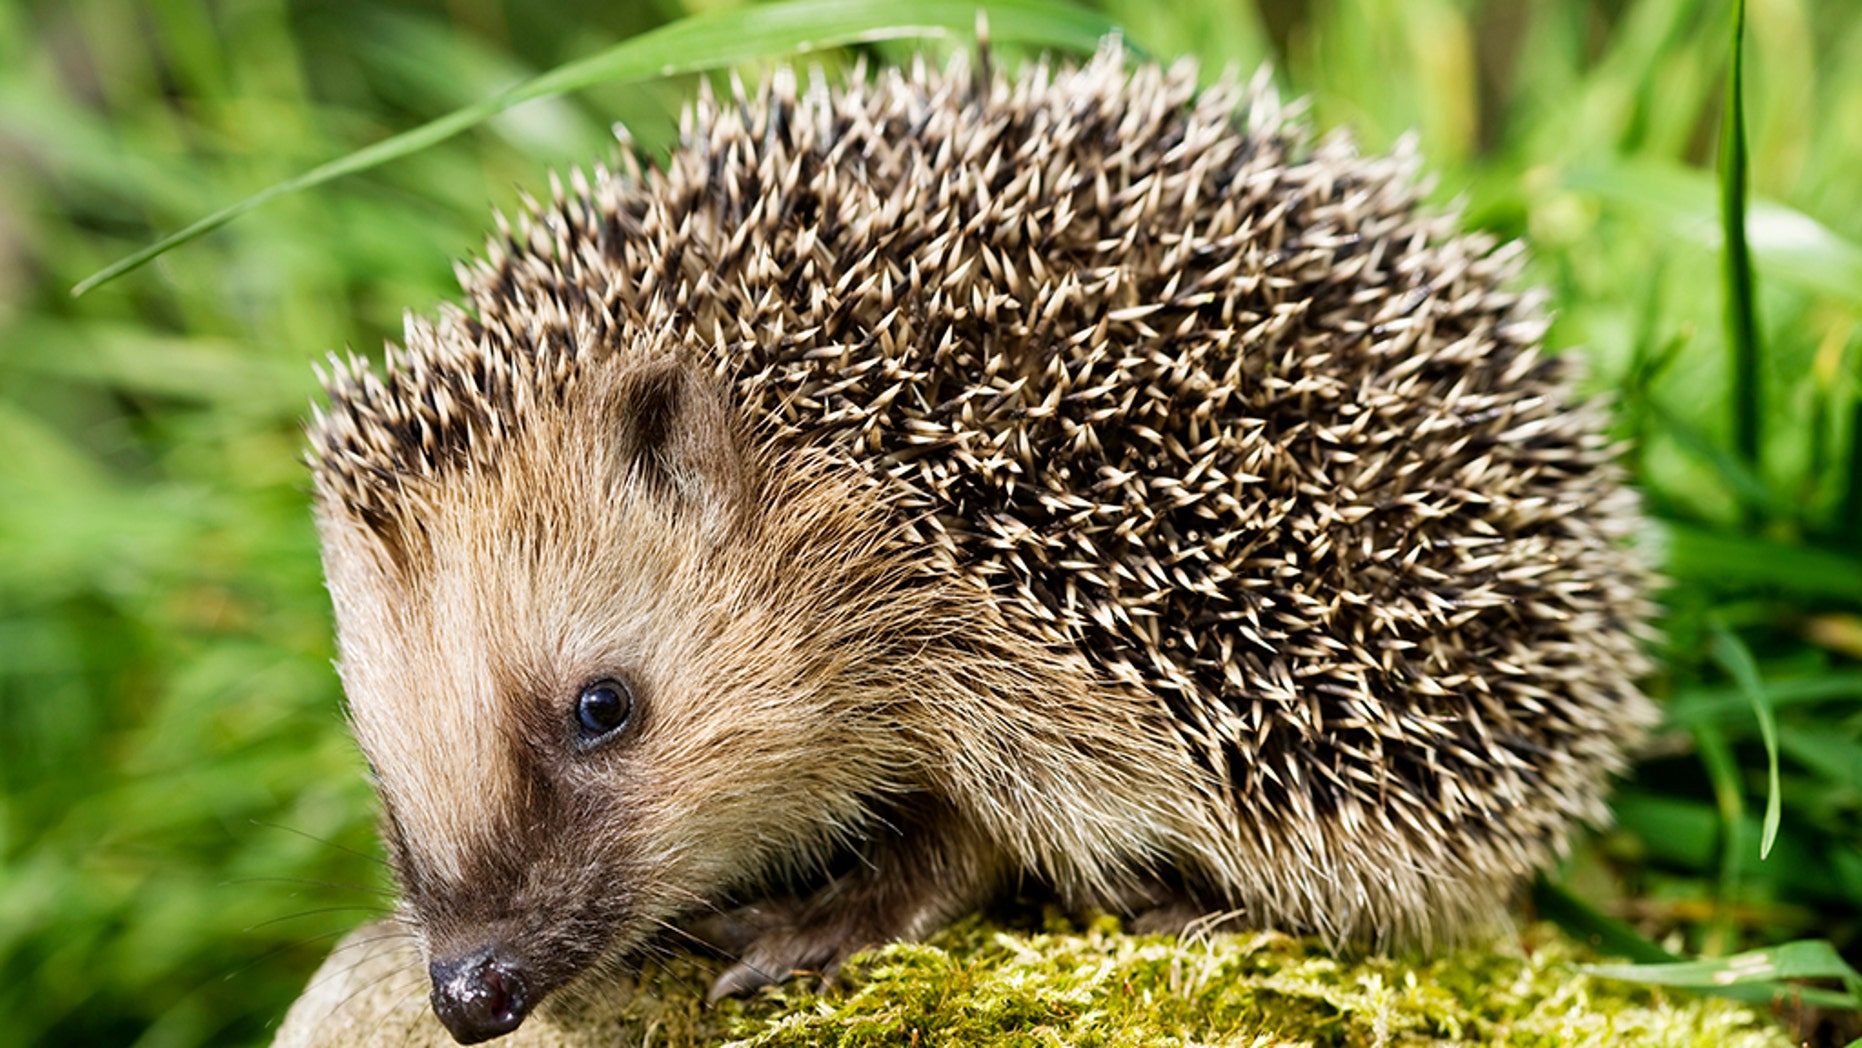 Pet hedgehogs associated with salmonella outbreak, ‘don’t kiss or snuggle’ them, CDC warns